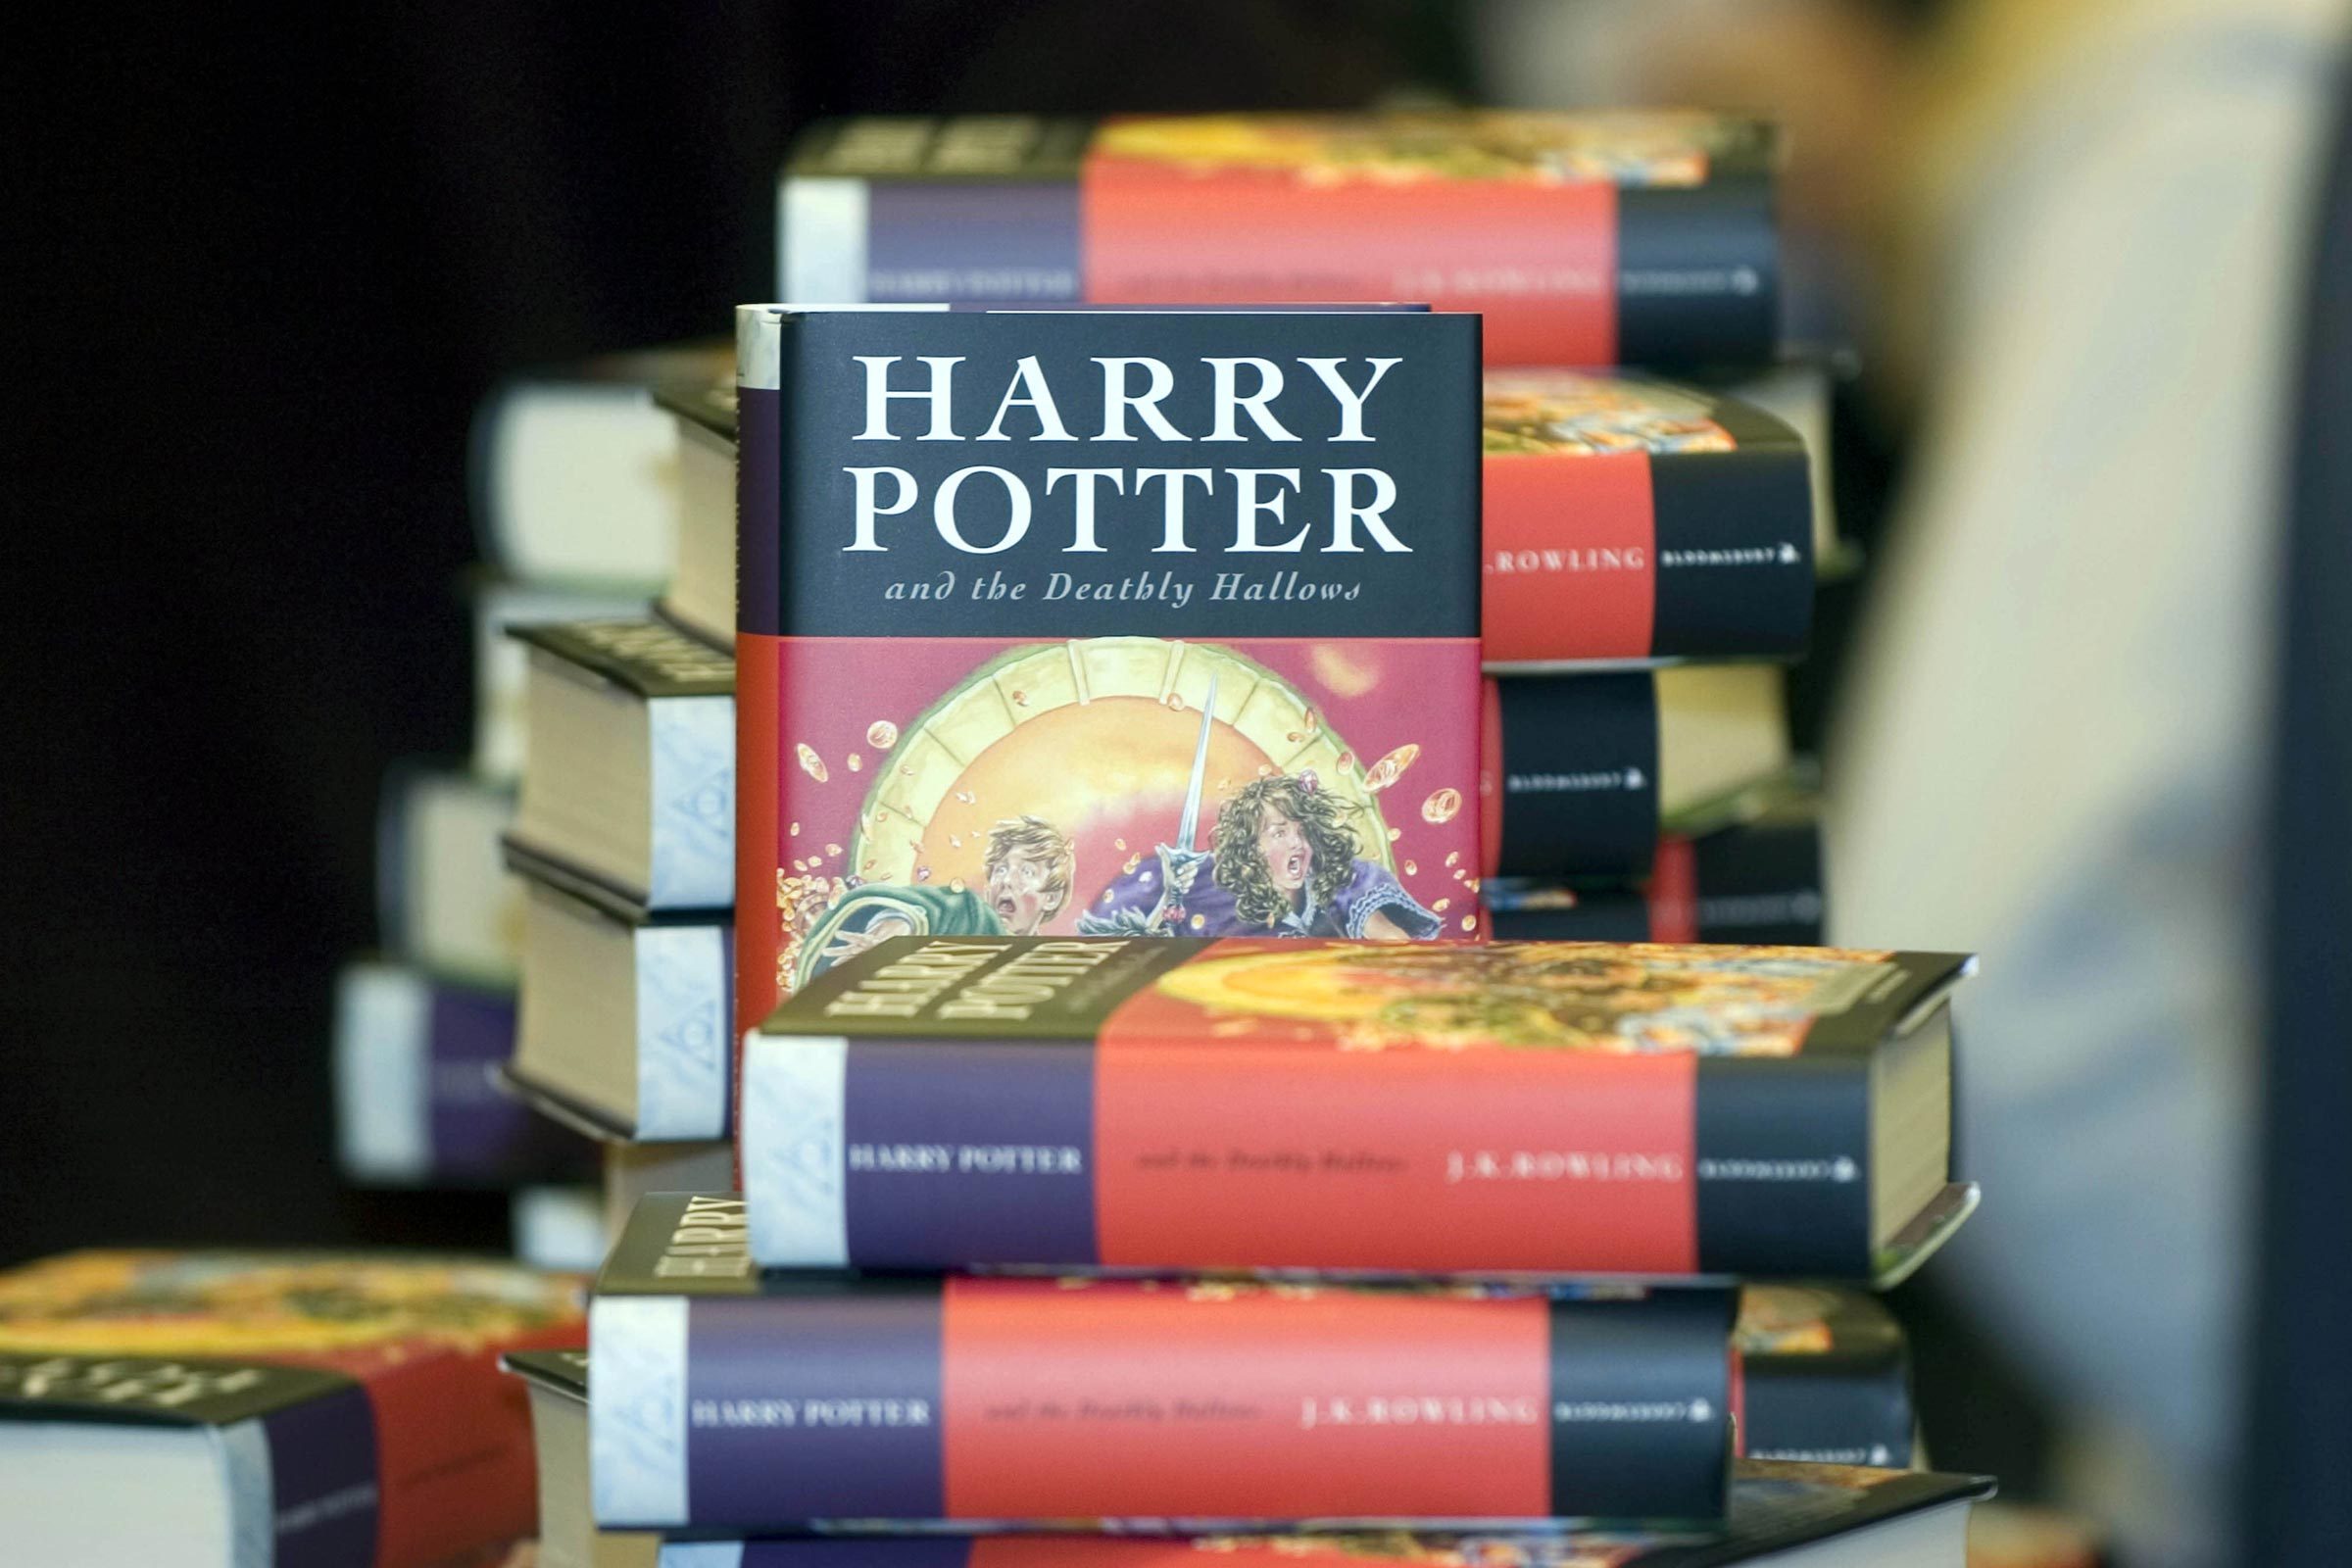 Harry Potter': 10 things you never knew about the books and films